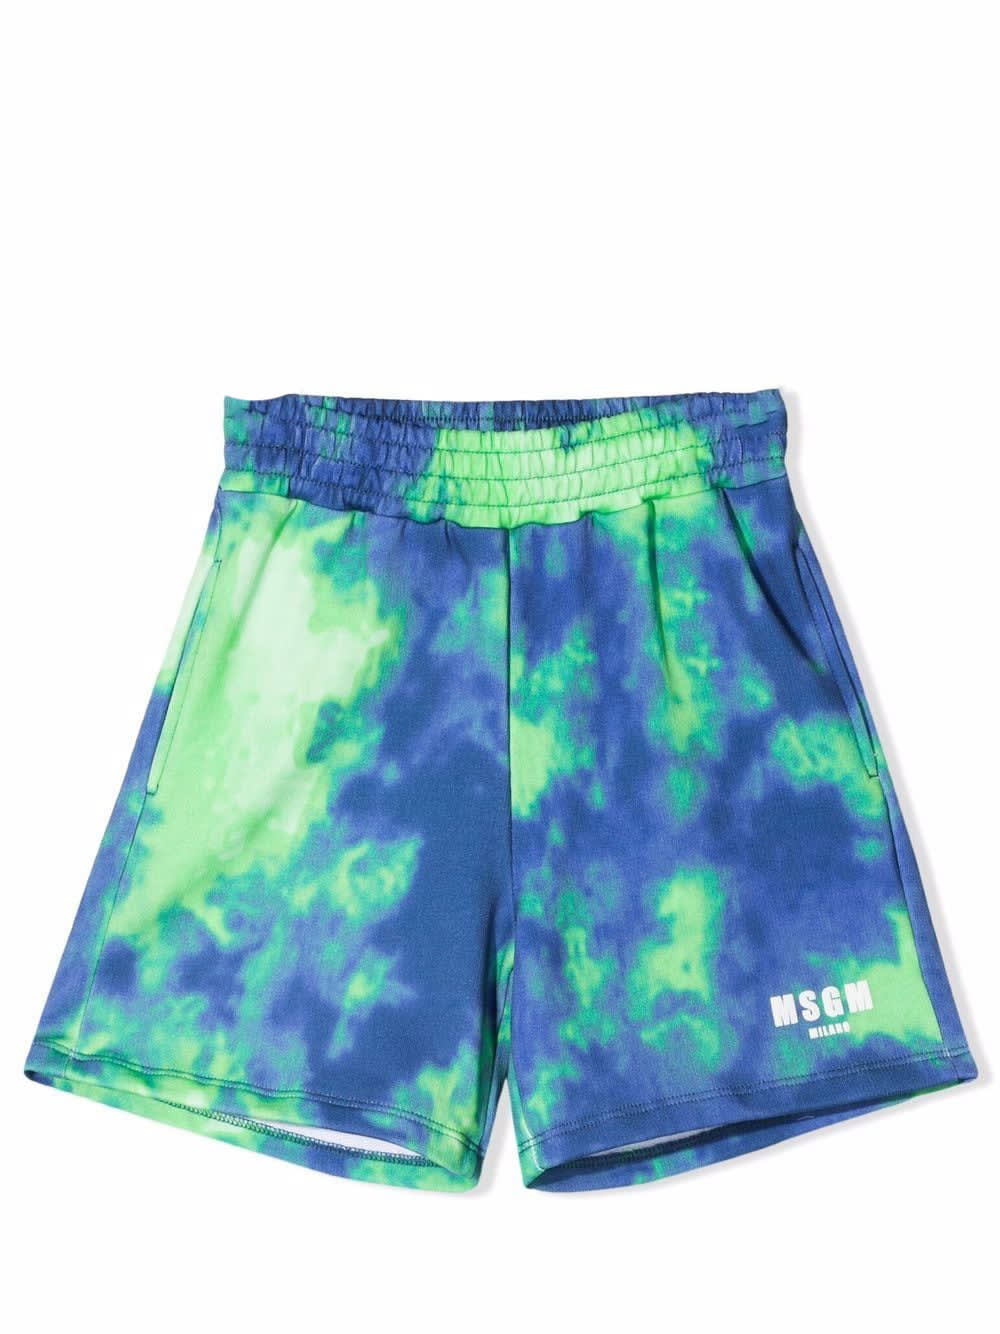 MSGM Sports Shorts With Tie Dye Pattern